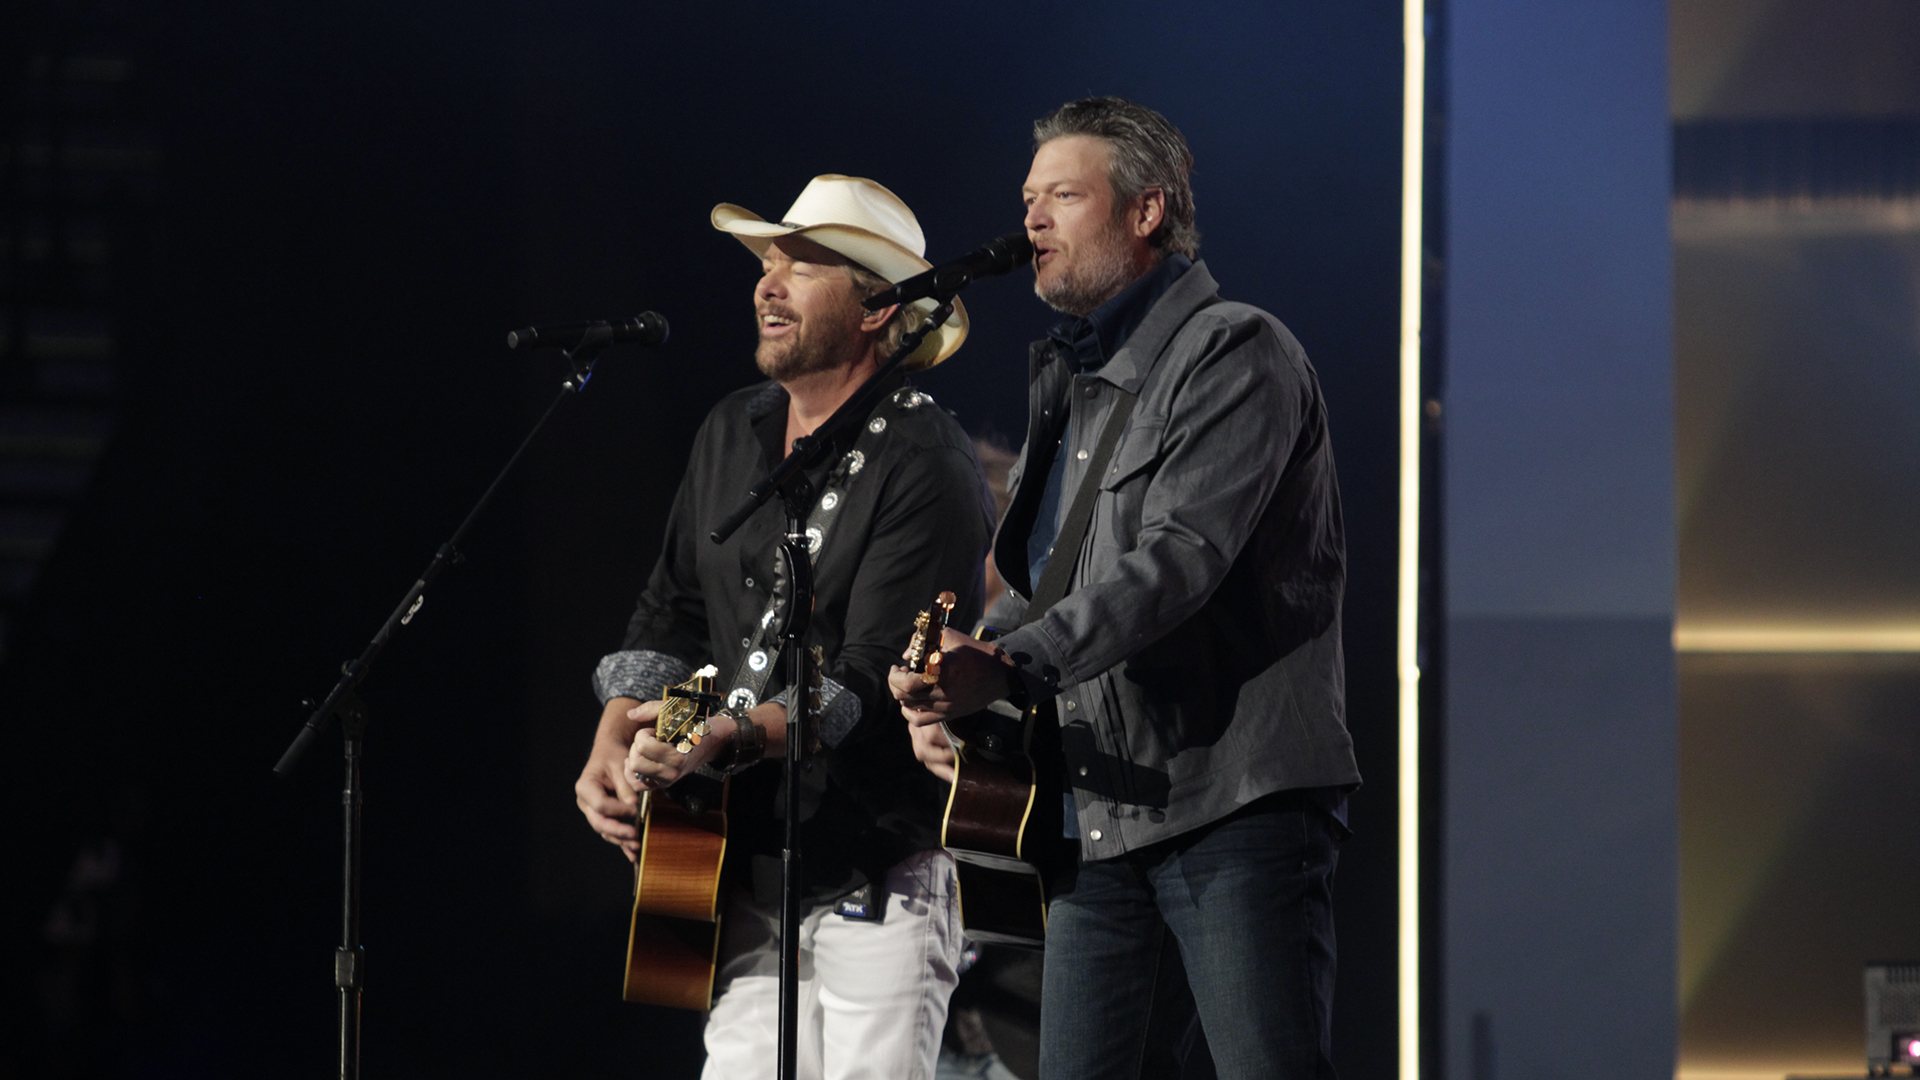 In an ACM flashback, Toby Keith and Blake Shelton perform Keith's 1993 hit 